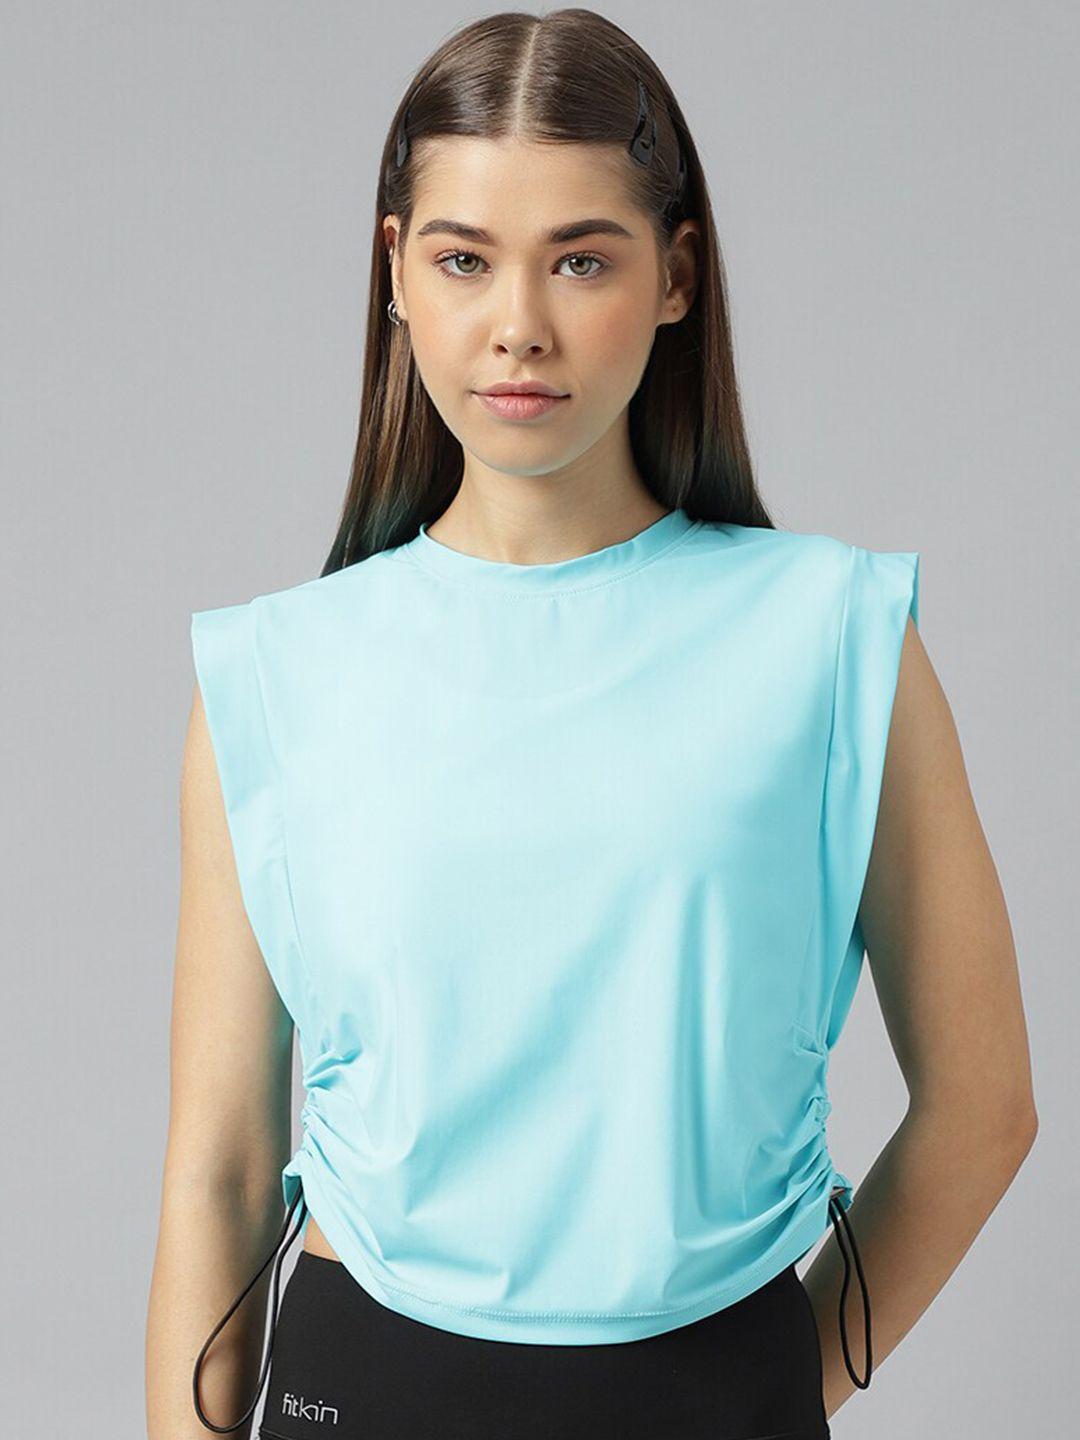 fitkin round neck ruched detail boxy top